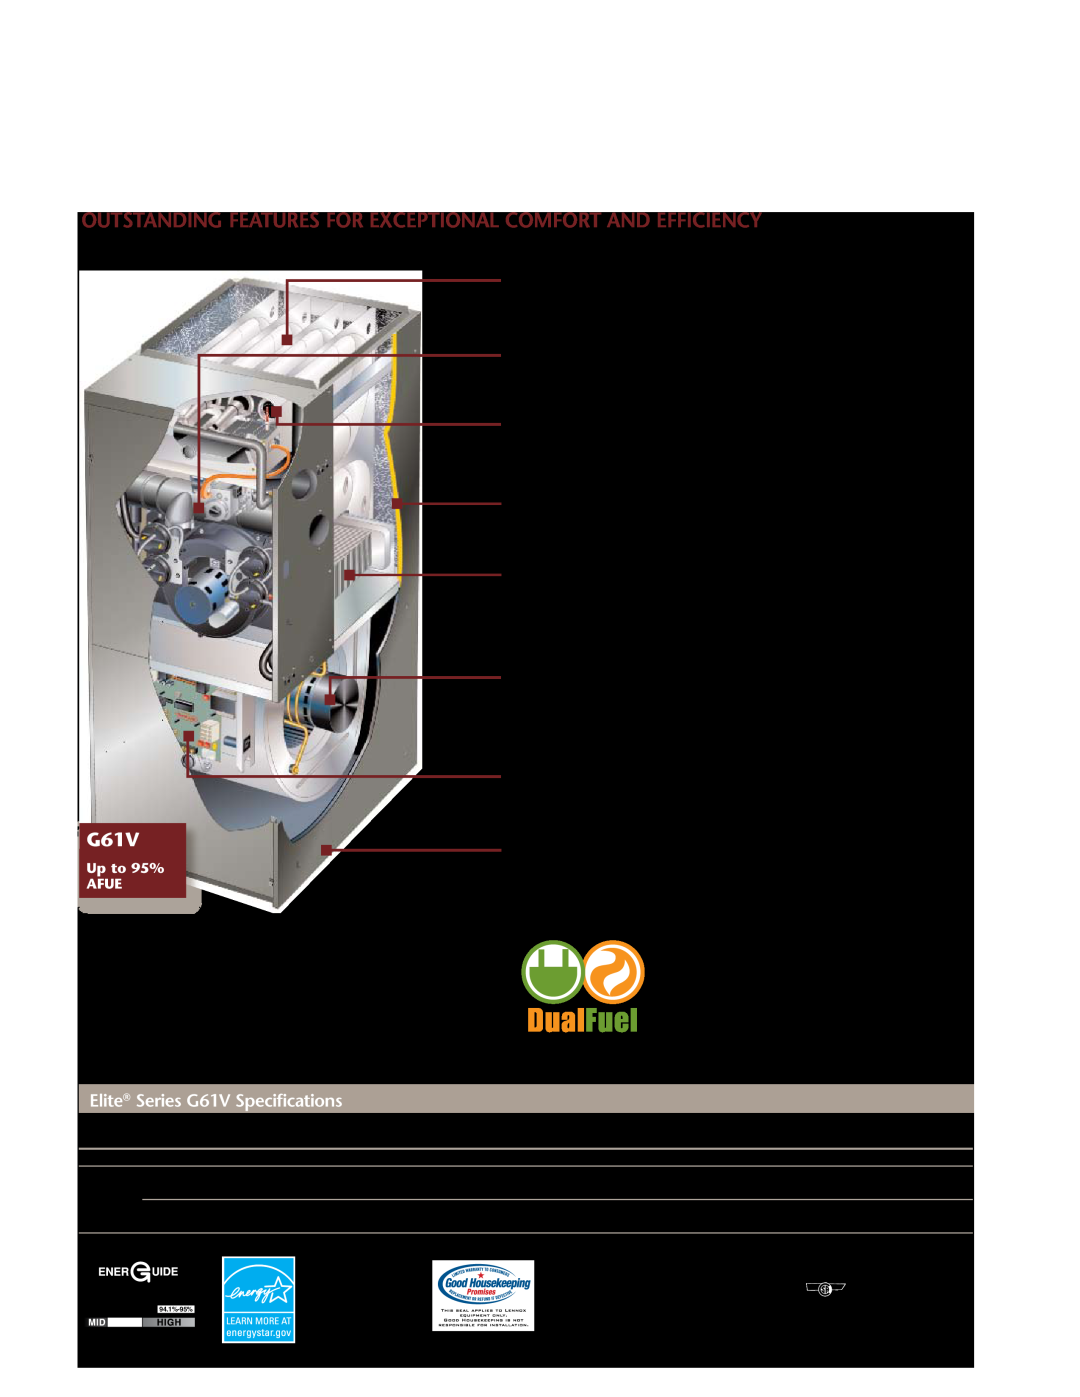 Lenoxx Electronics manual Robust Stainless Steel Secondary Heat Exchanger, Elite Series G61V Specifications 